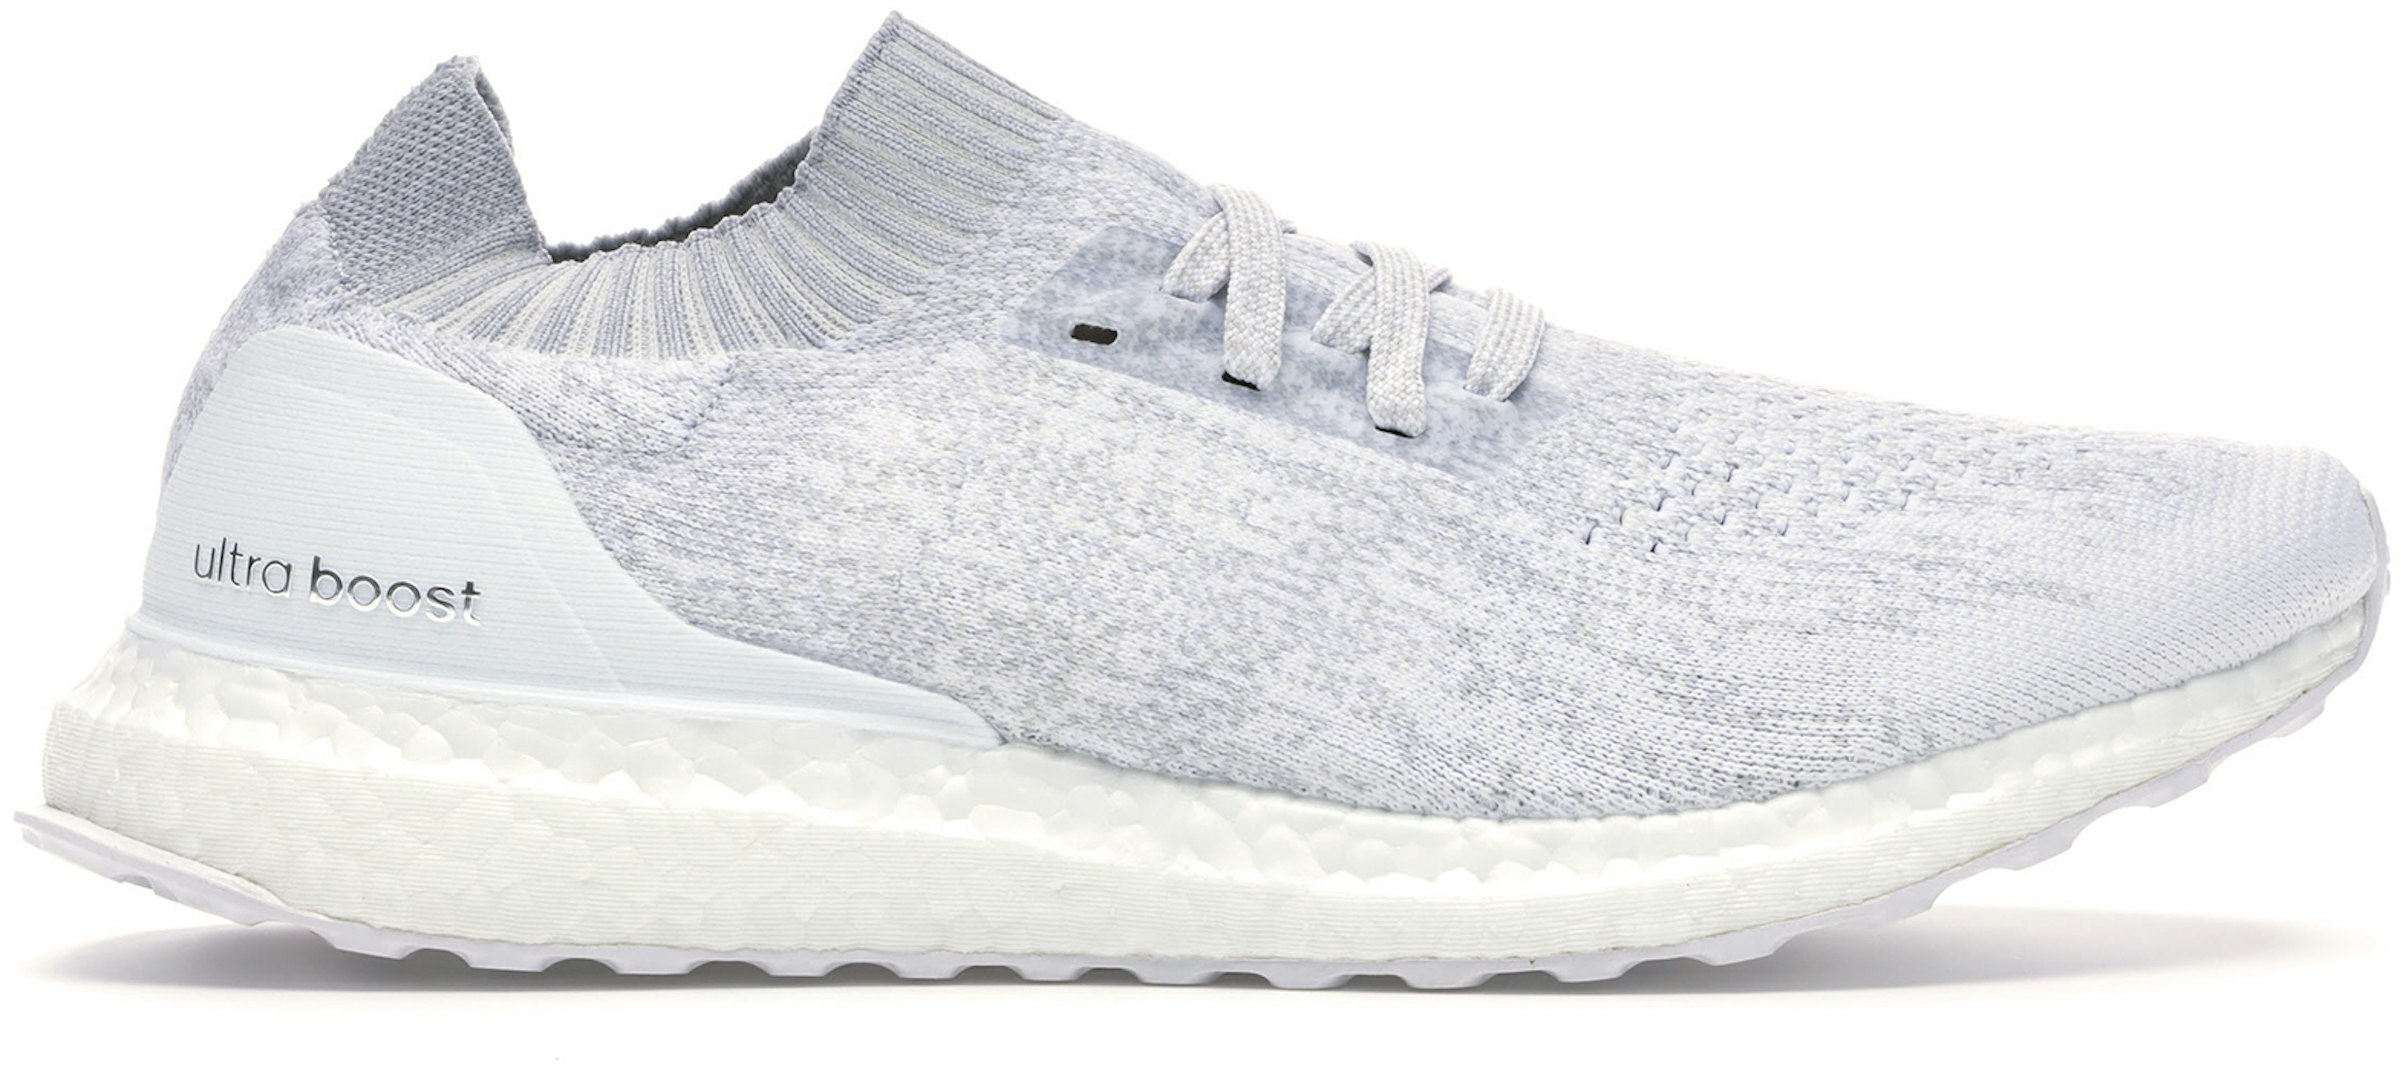 adidas Ultra Boost Uncaged Triple White (2017/2021) - BY2549 - US